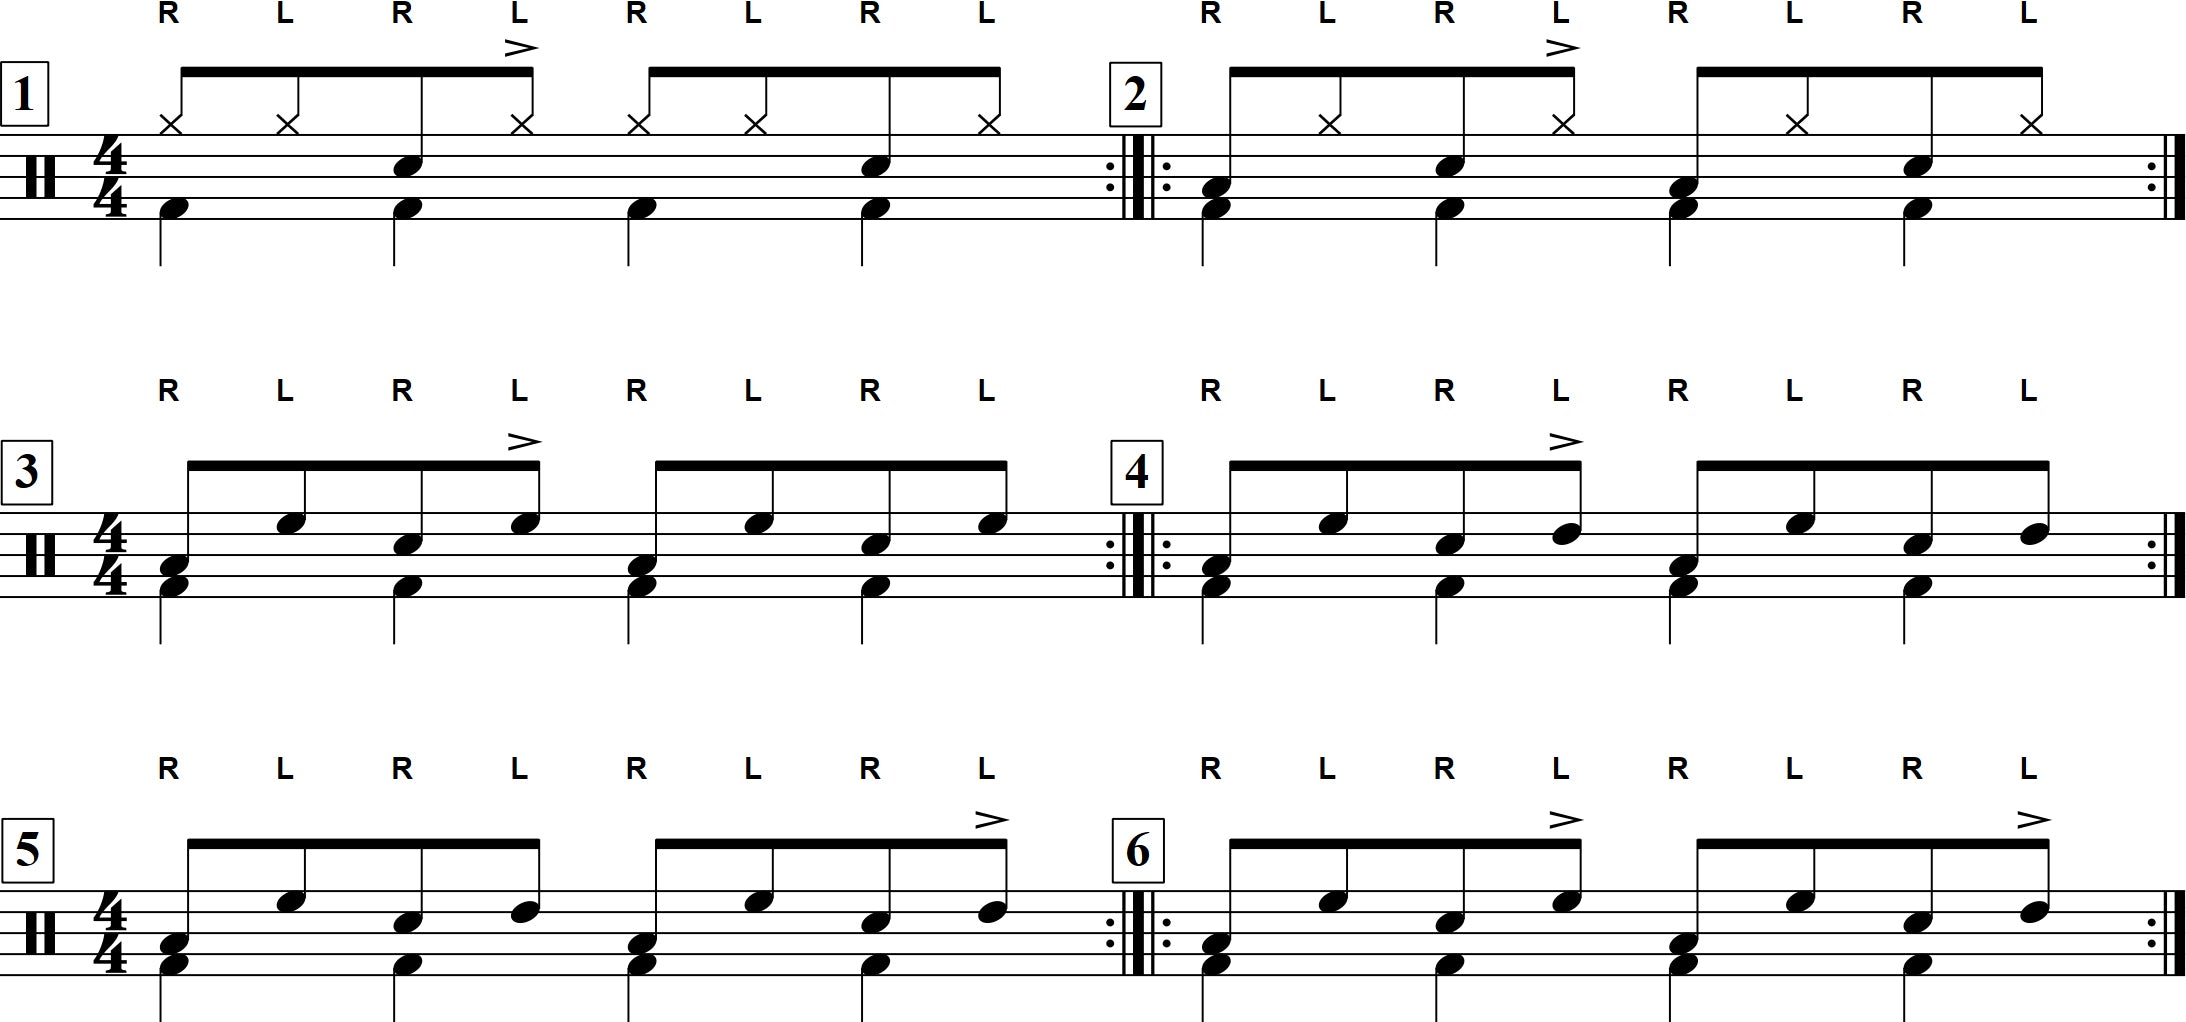 Drum notation for the "Your Go-To Rock Shuffle" drum lesson. Ex. 2.